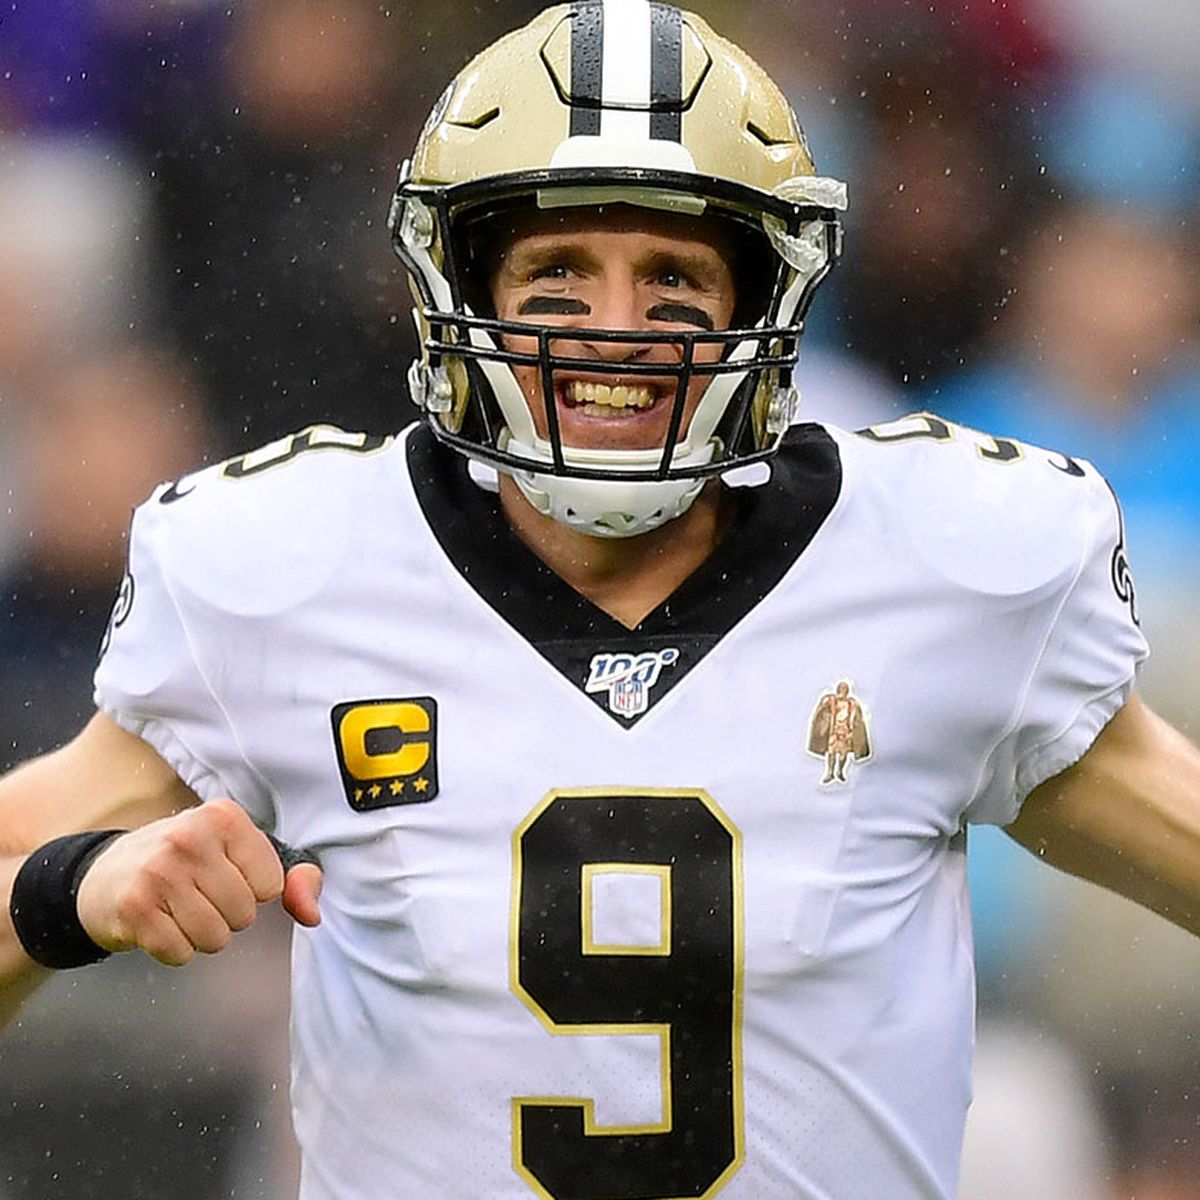 Drew Brees announces his retirement from the NFL at age 42 